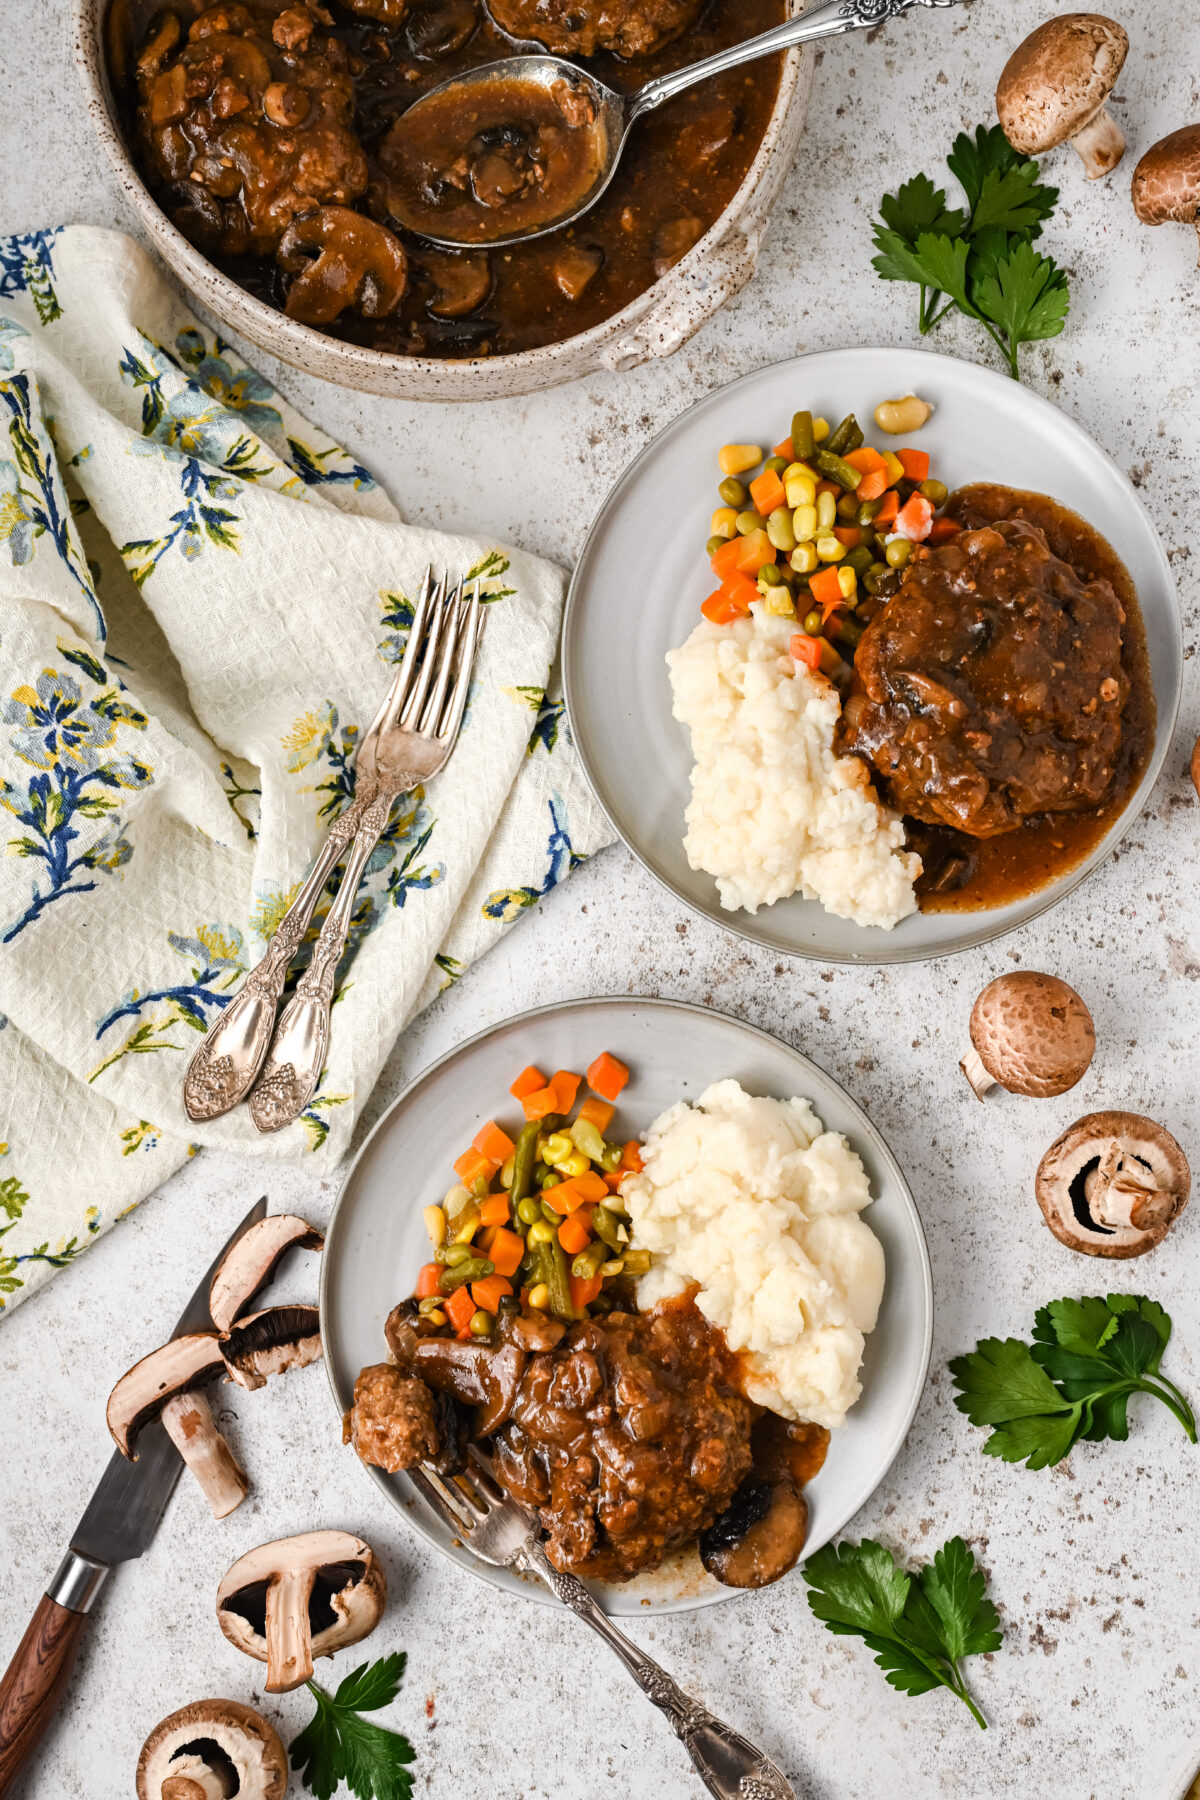 Looking for a delicious, easy and quick dinner idea? Try this Instant Pot Salisbury Steak recipe. It's sure to be a family favourite!